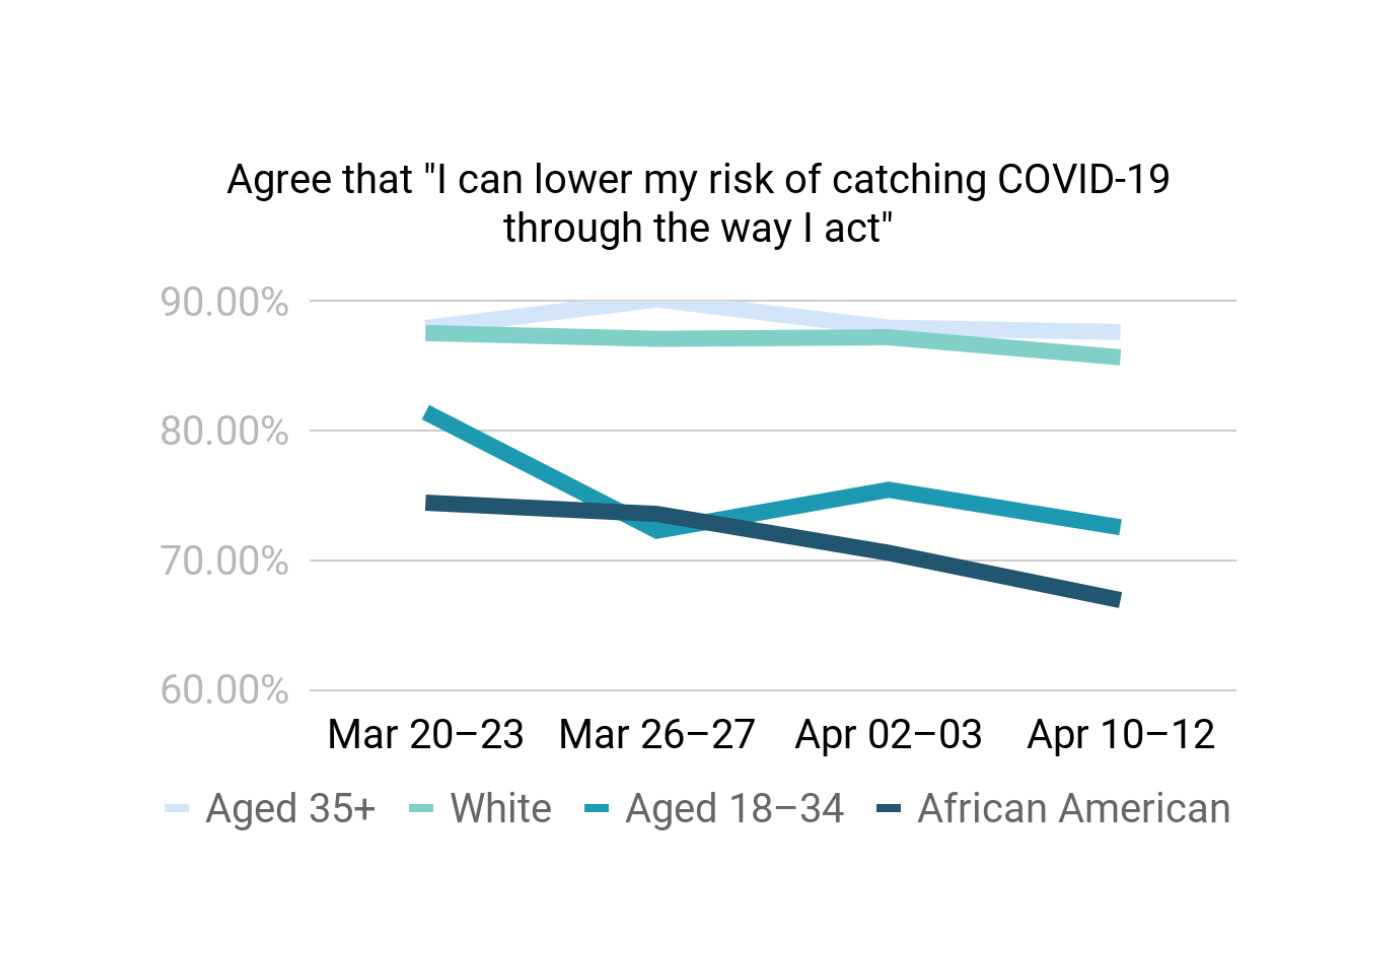 Perceived risk of catching COVID-19